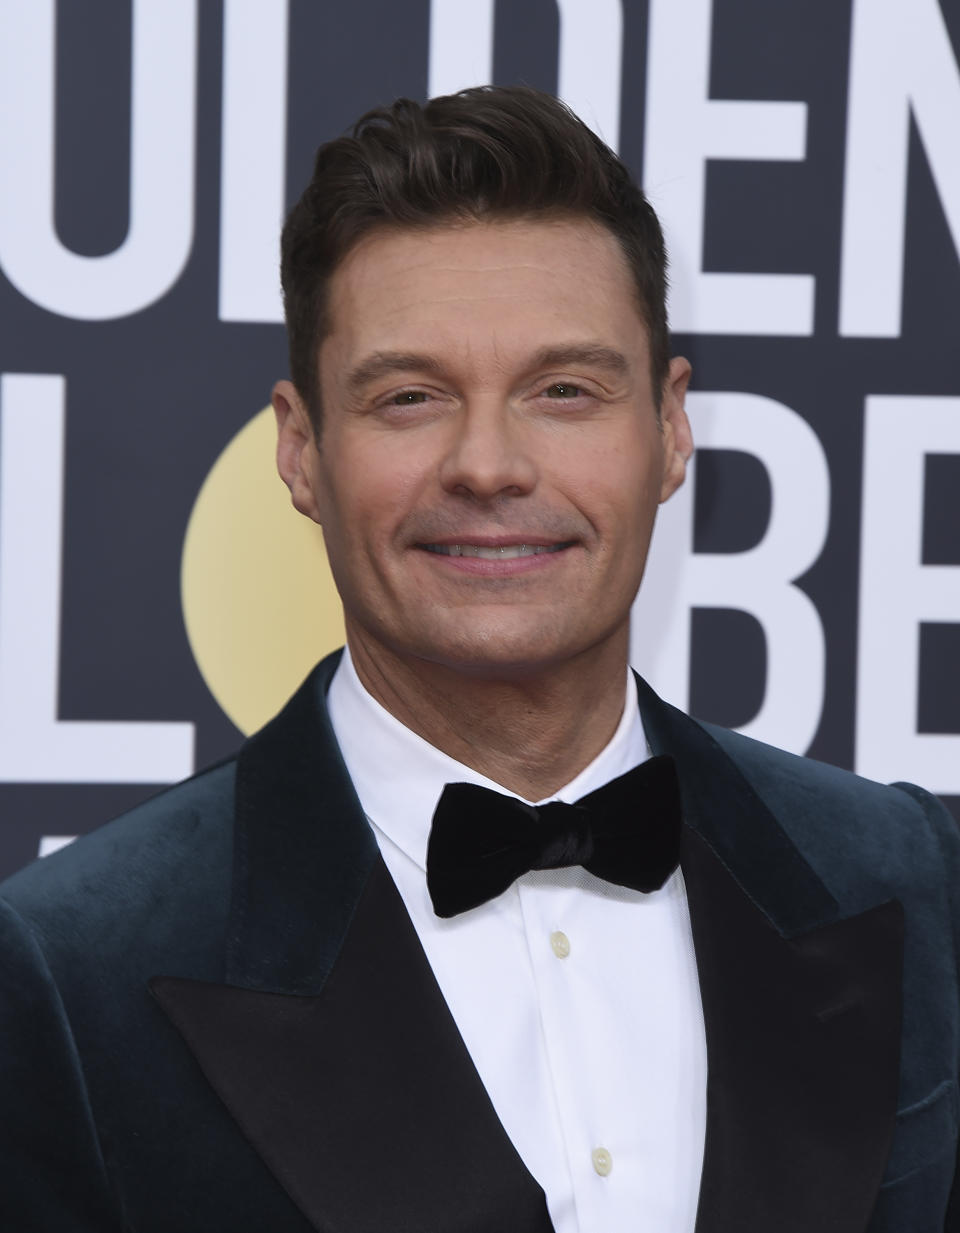 Ryan Seacrest arrives at the 77th annual Golden Globe Awards at the Beverly Hilton Hotel on Sunday, Jan. 5, 2020, in Beverly Hills, Calif. (Photo by Jordan Strauss/Invision/AP)